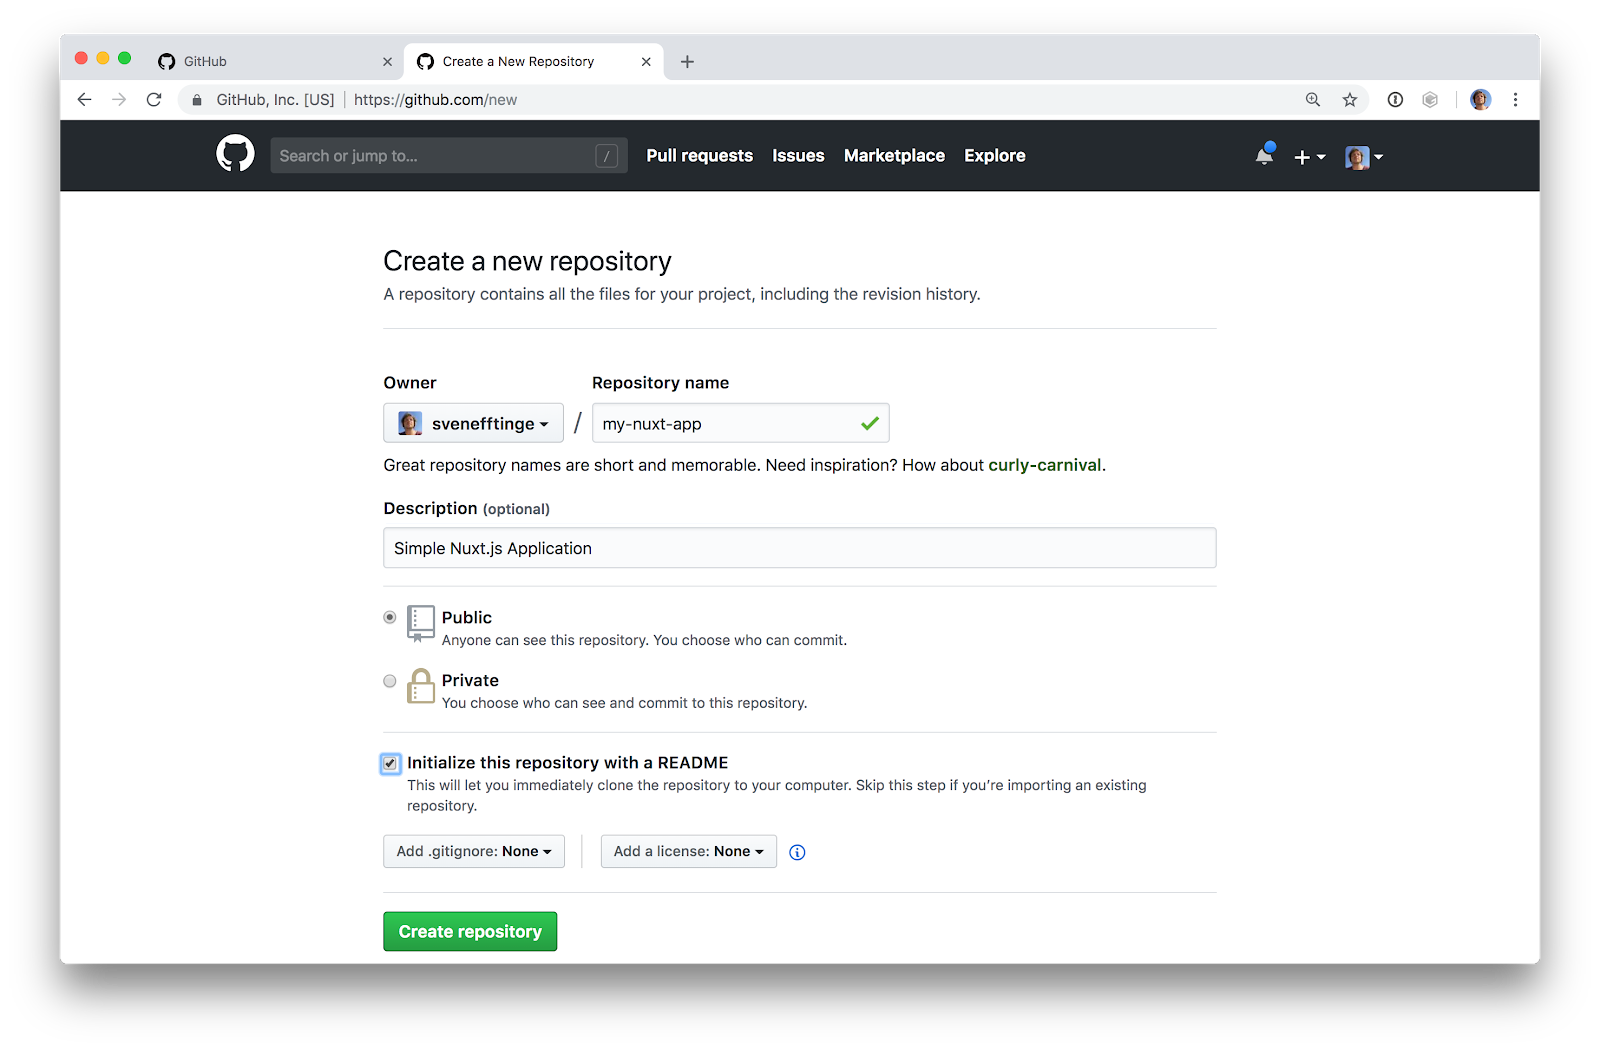 GitHub 'Create a new repository' page